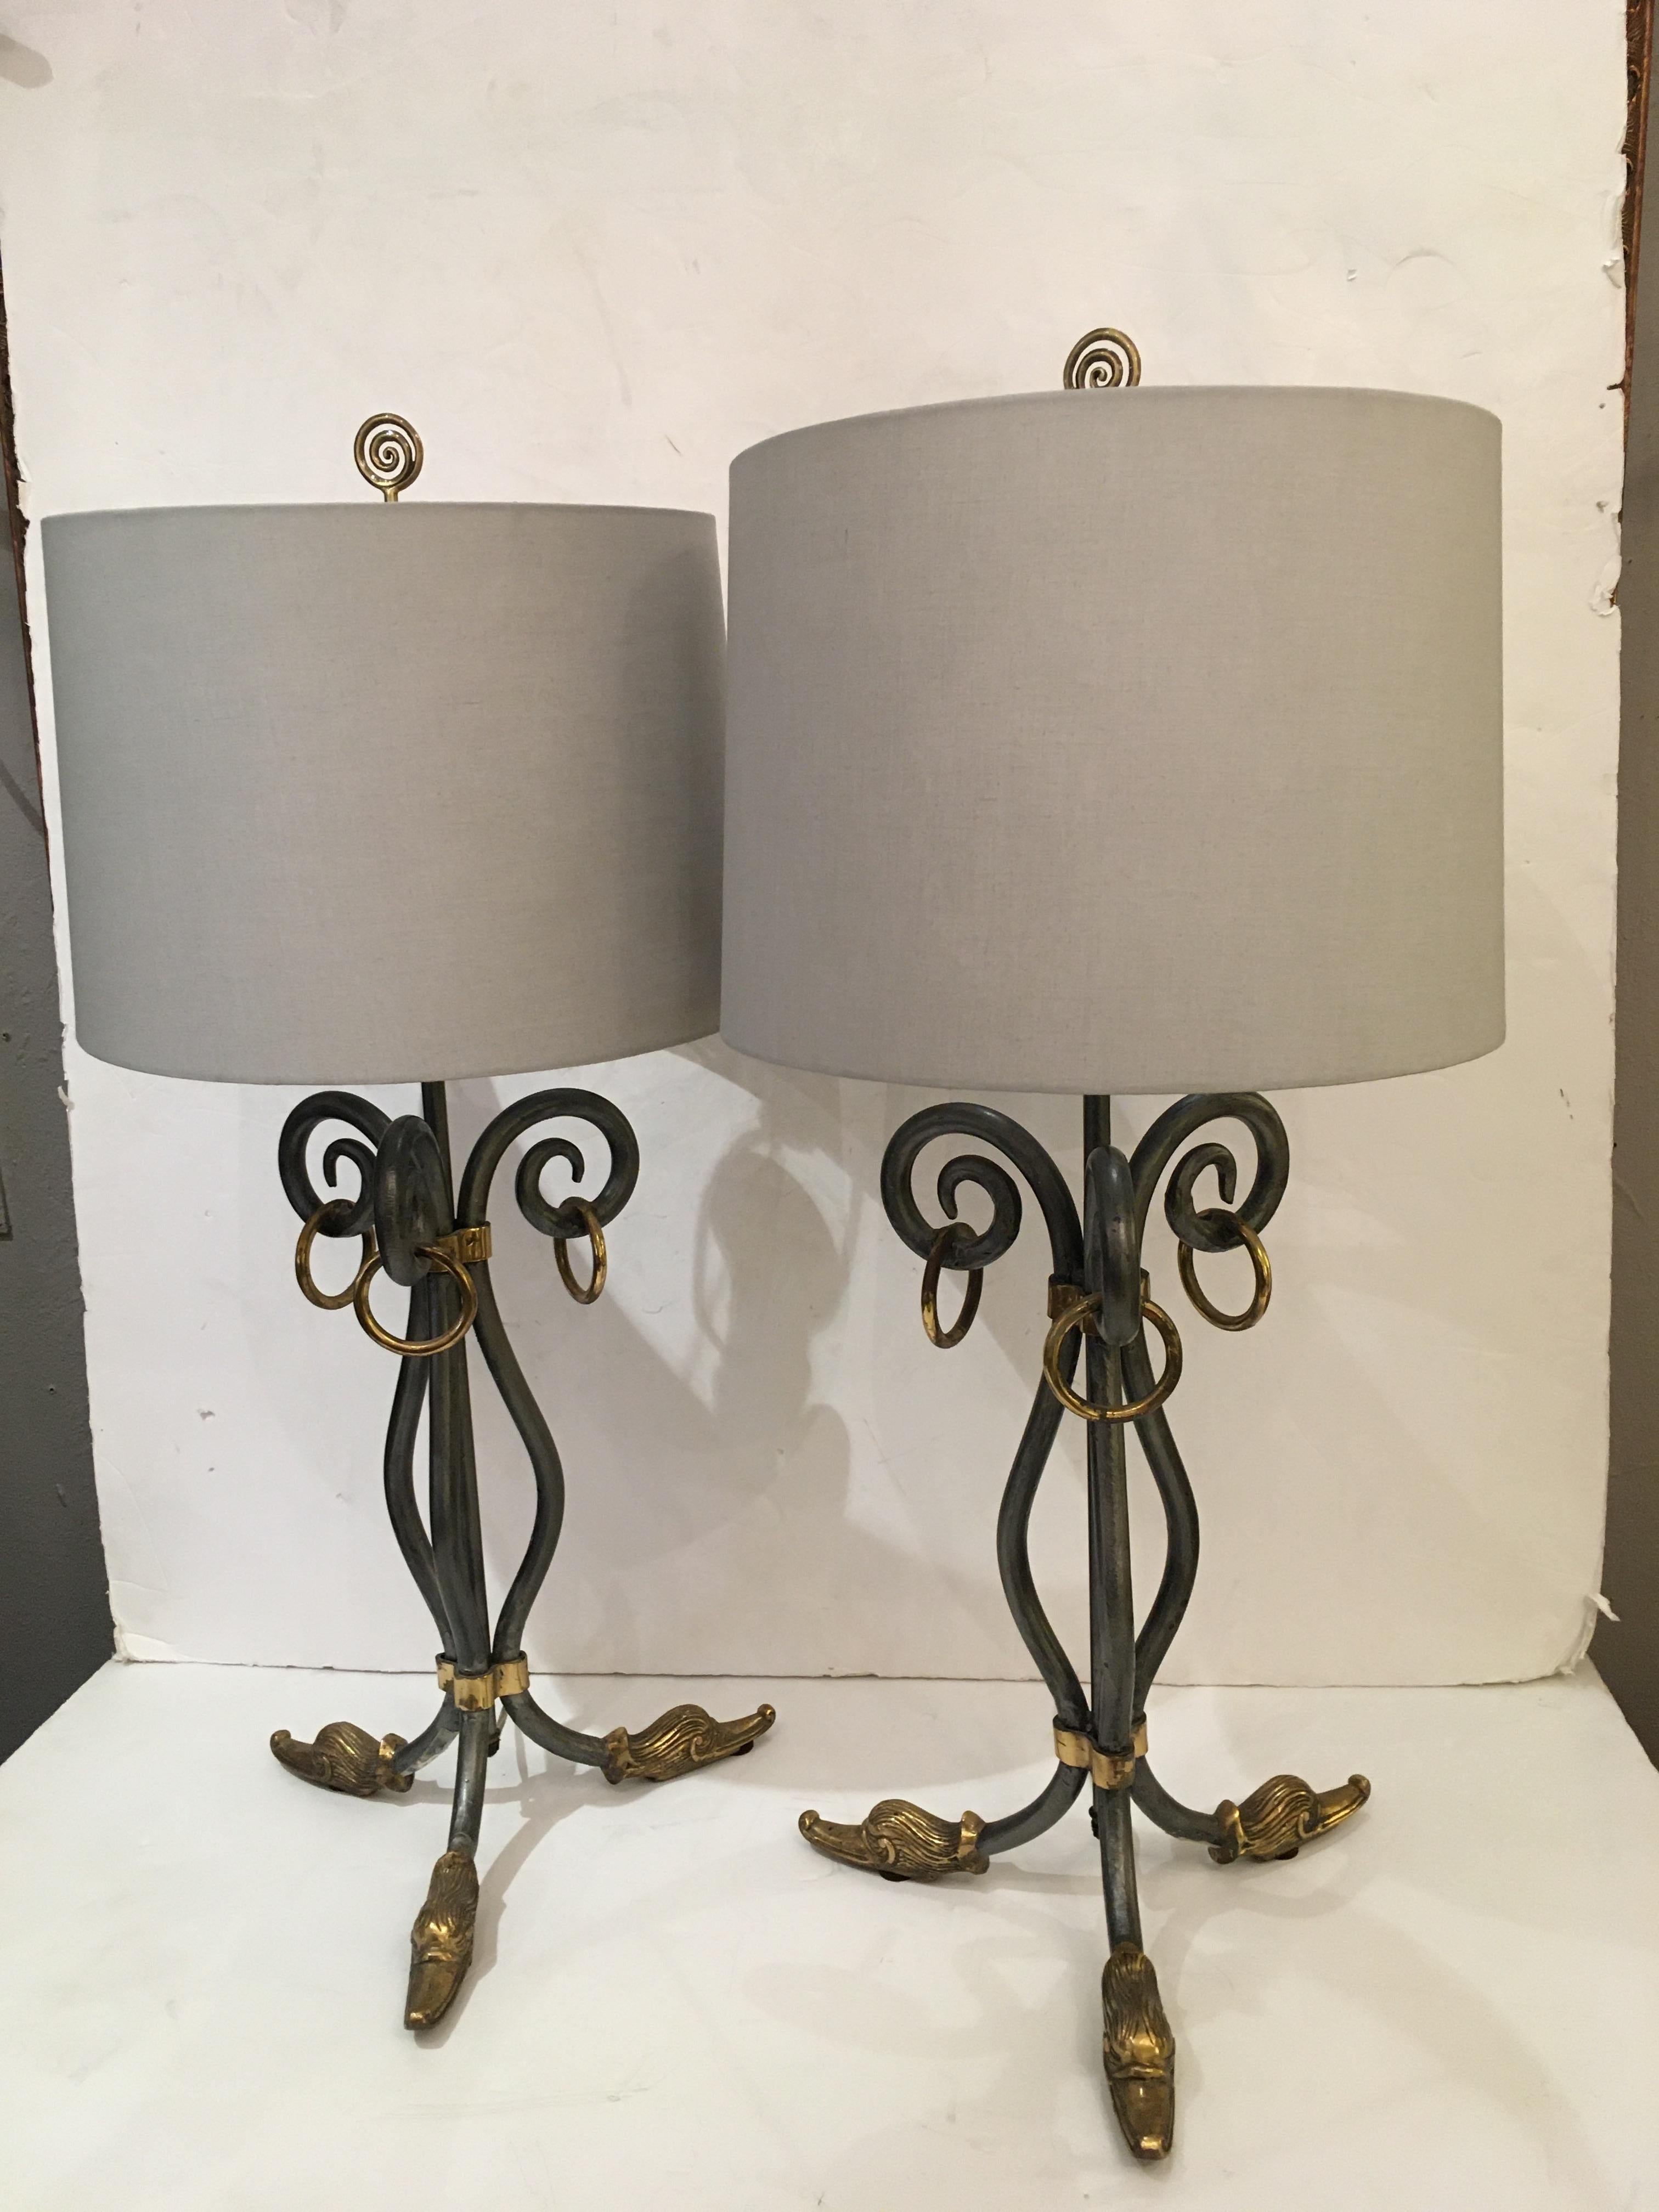 Stylish Pair of Silver Iron and Brass Table Lamps with Duck Feet In Good Condition For Sale In Hopewell, NJ